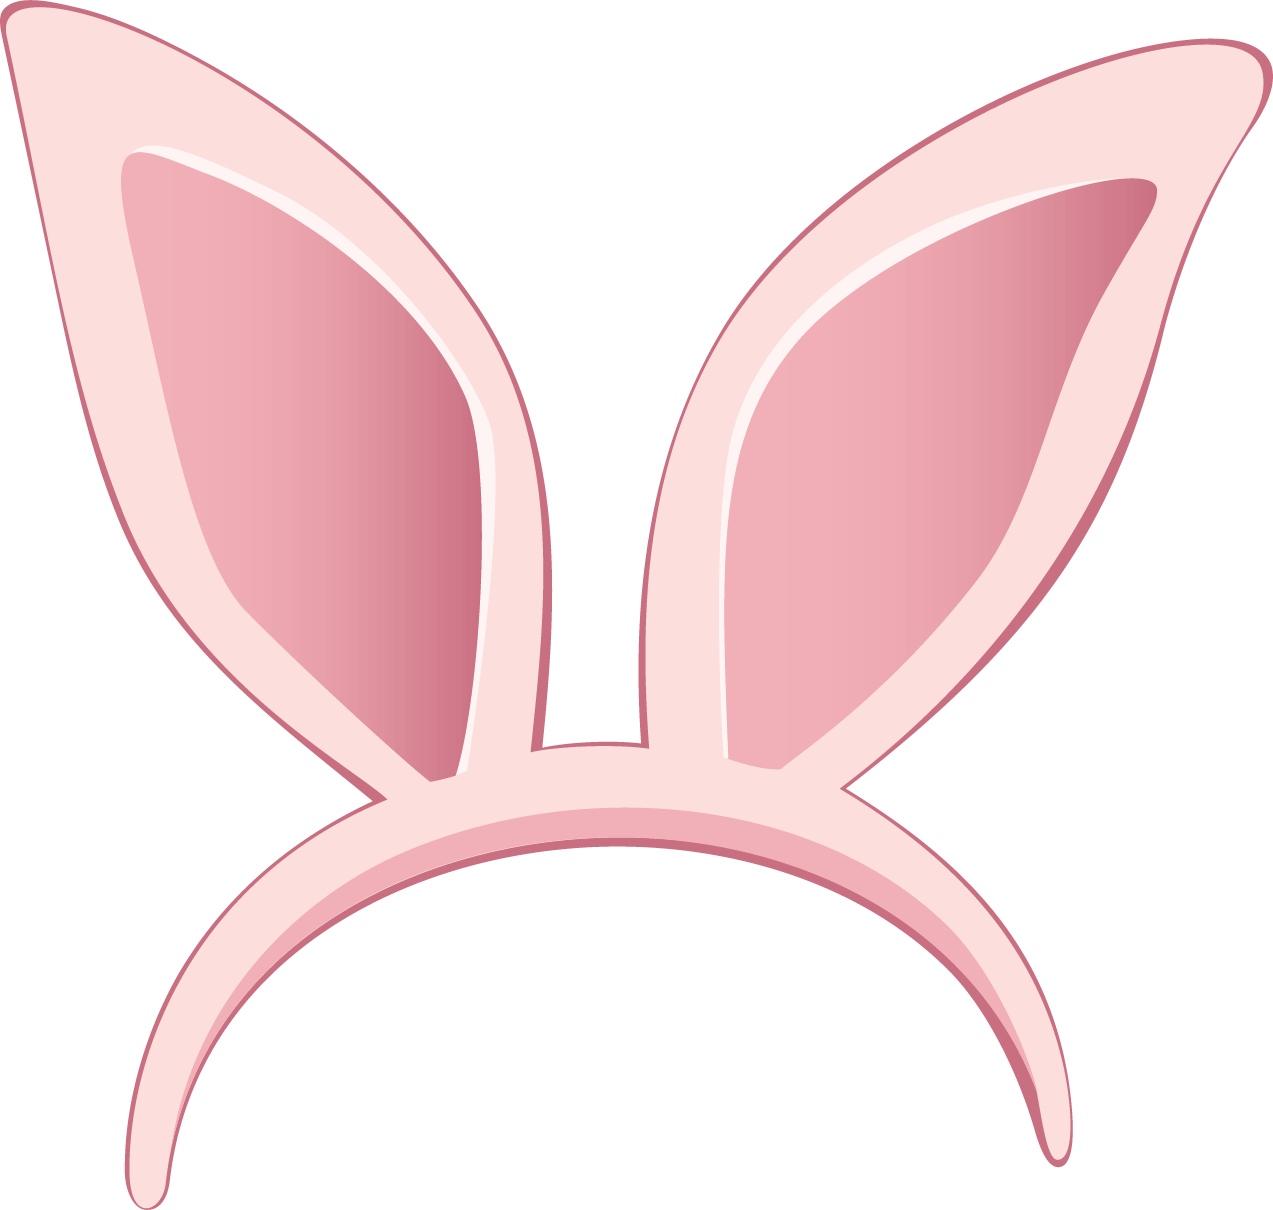 Free Bunny Ears Clipart, Download Free Clip Art, Free Clip Art on